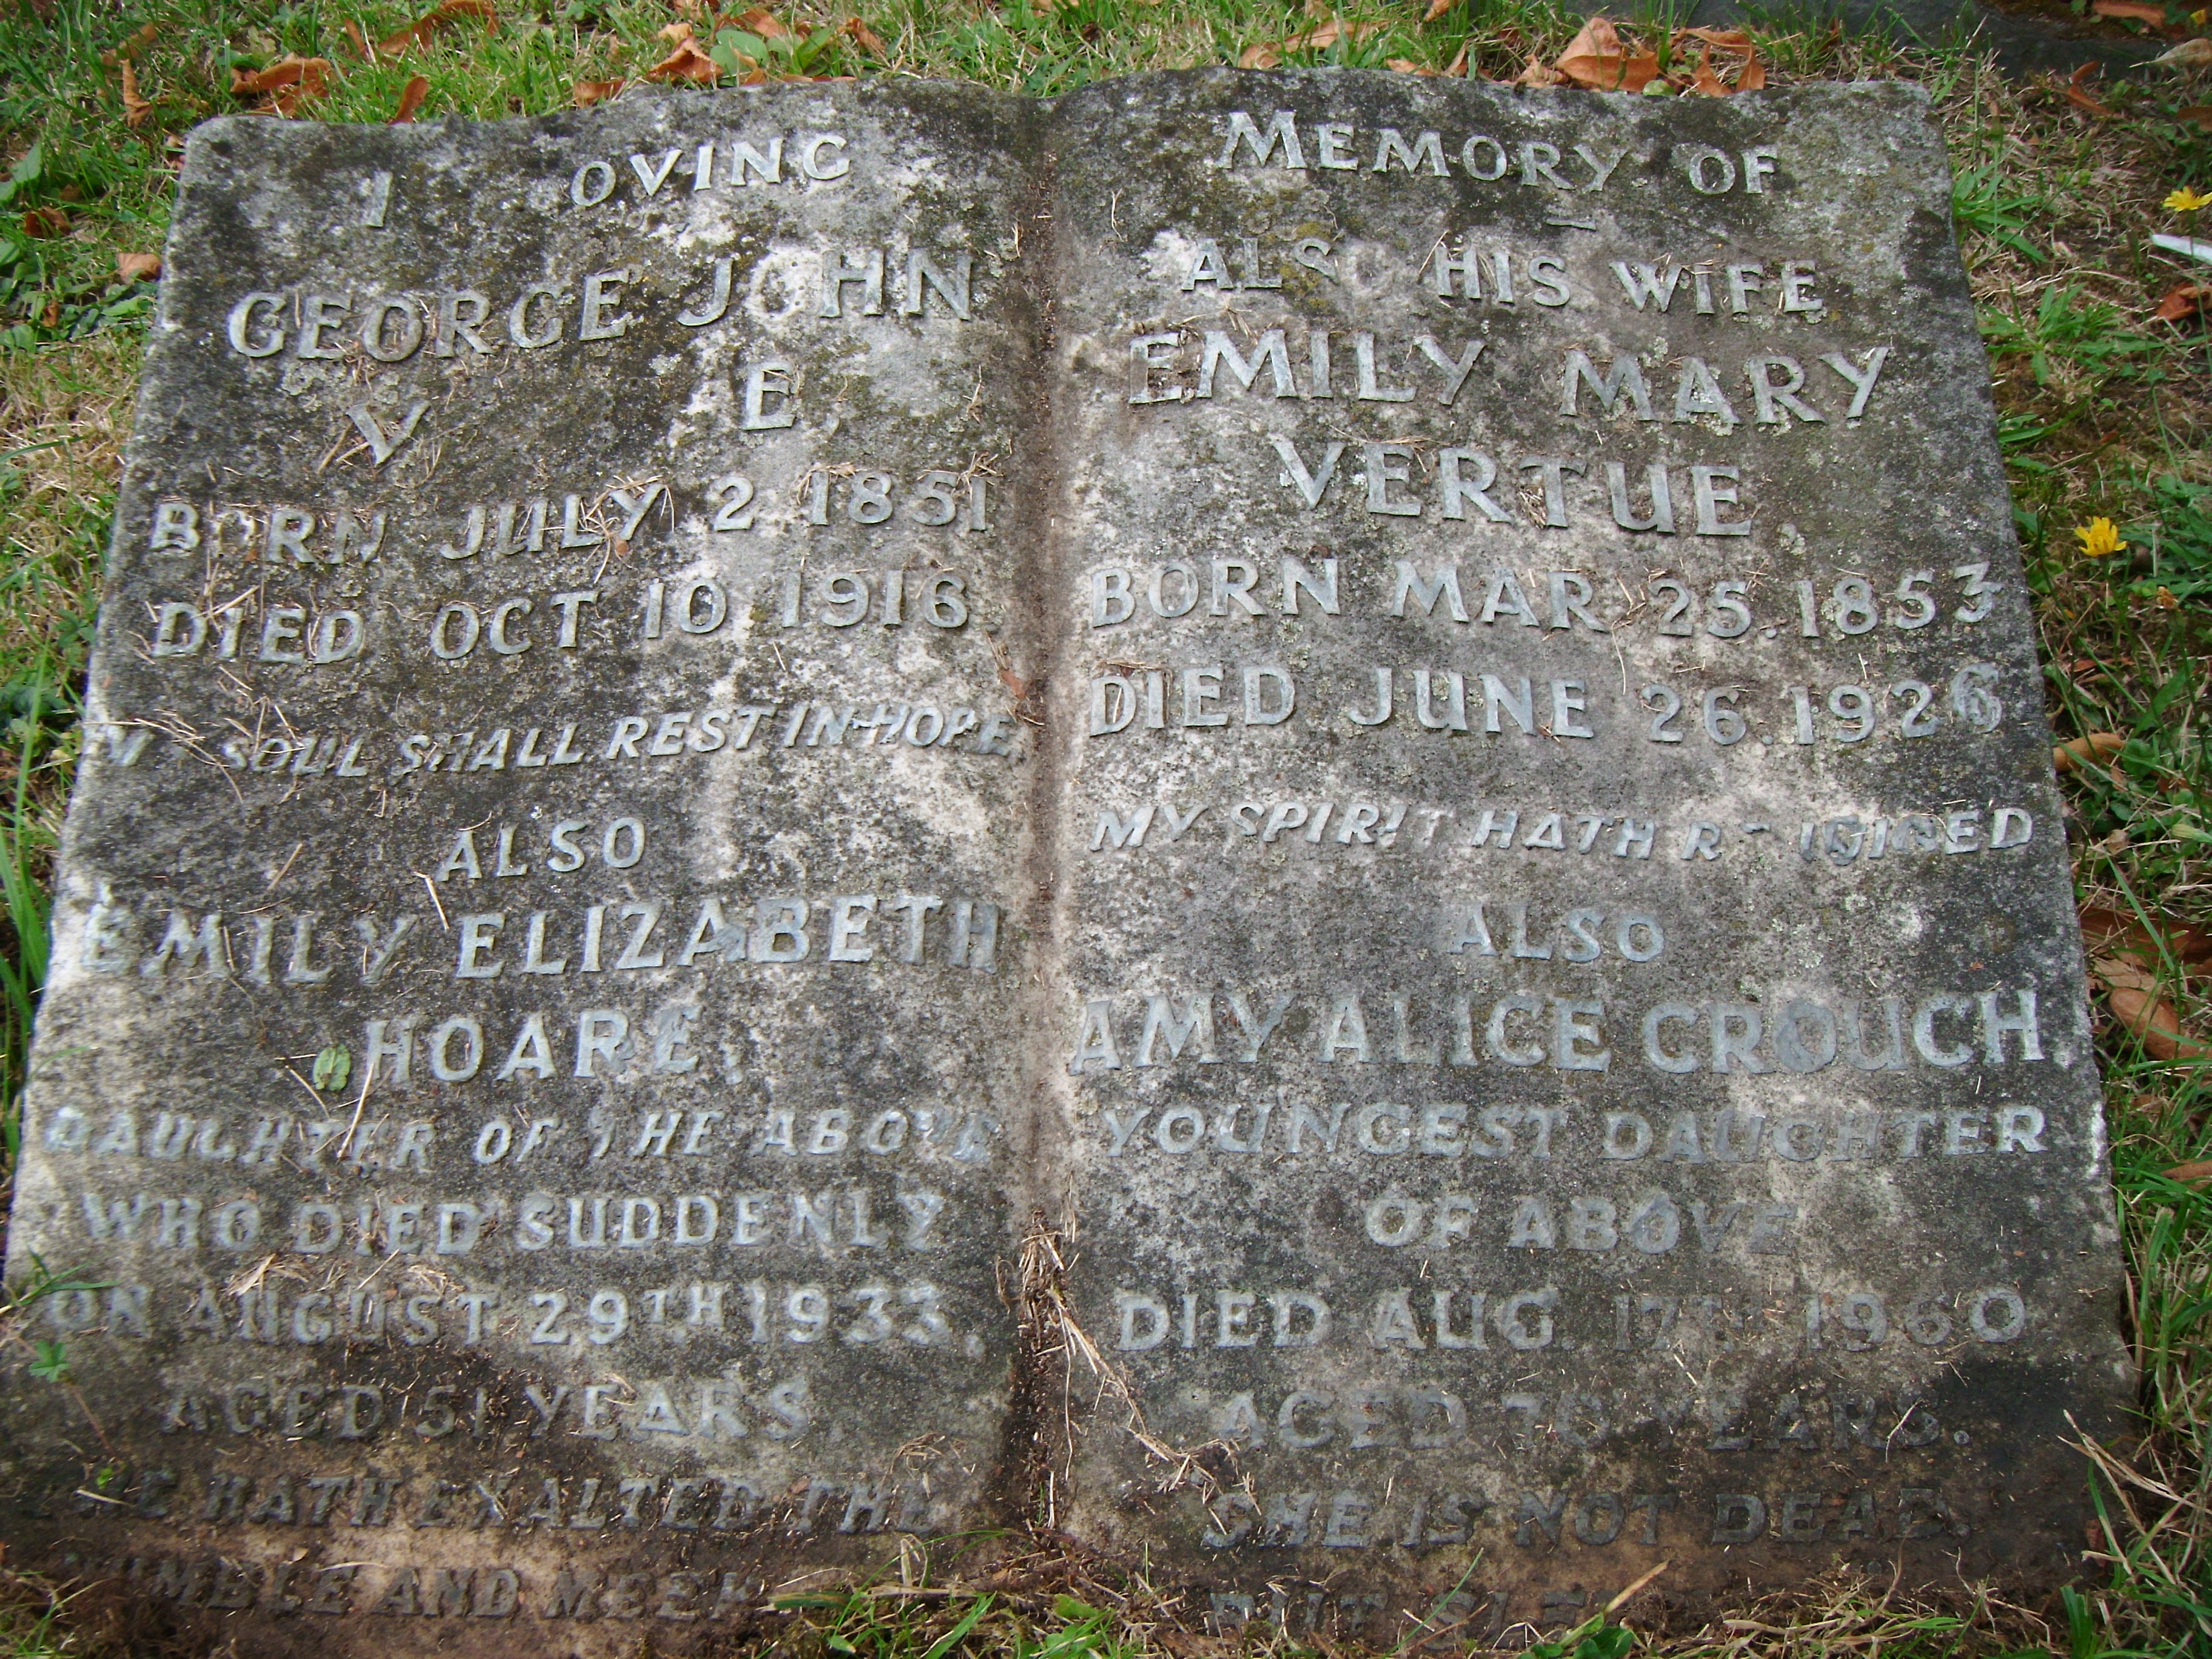 Burial stone of George John Vertue, who died in 1916, his wife Emily Mary 1926, daughter Emily Elizabeth Hoare 1933 and Alice Crouch 1960